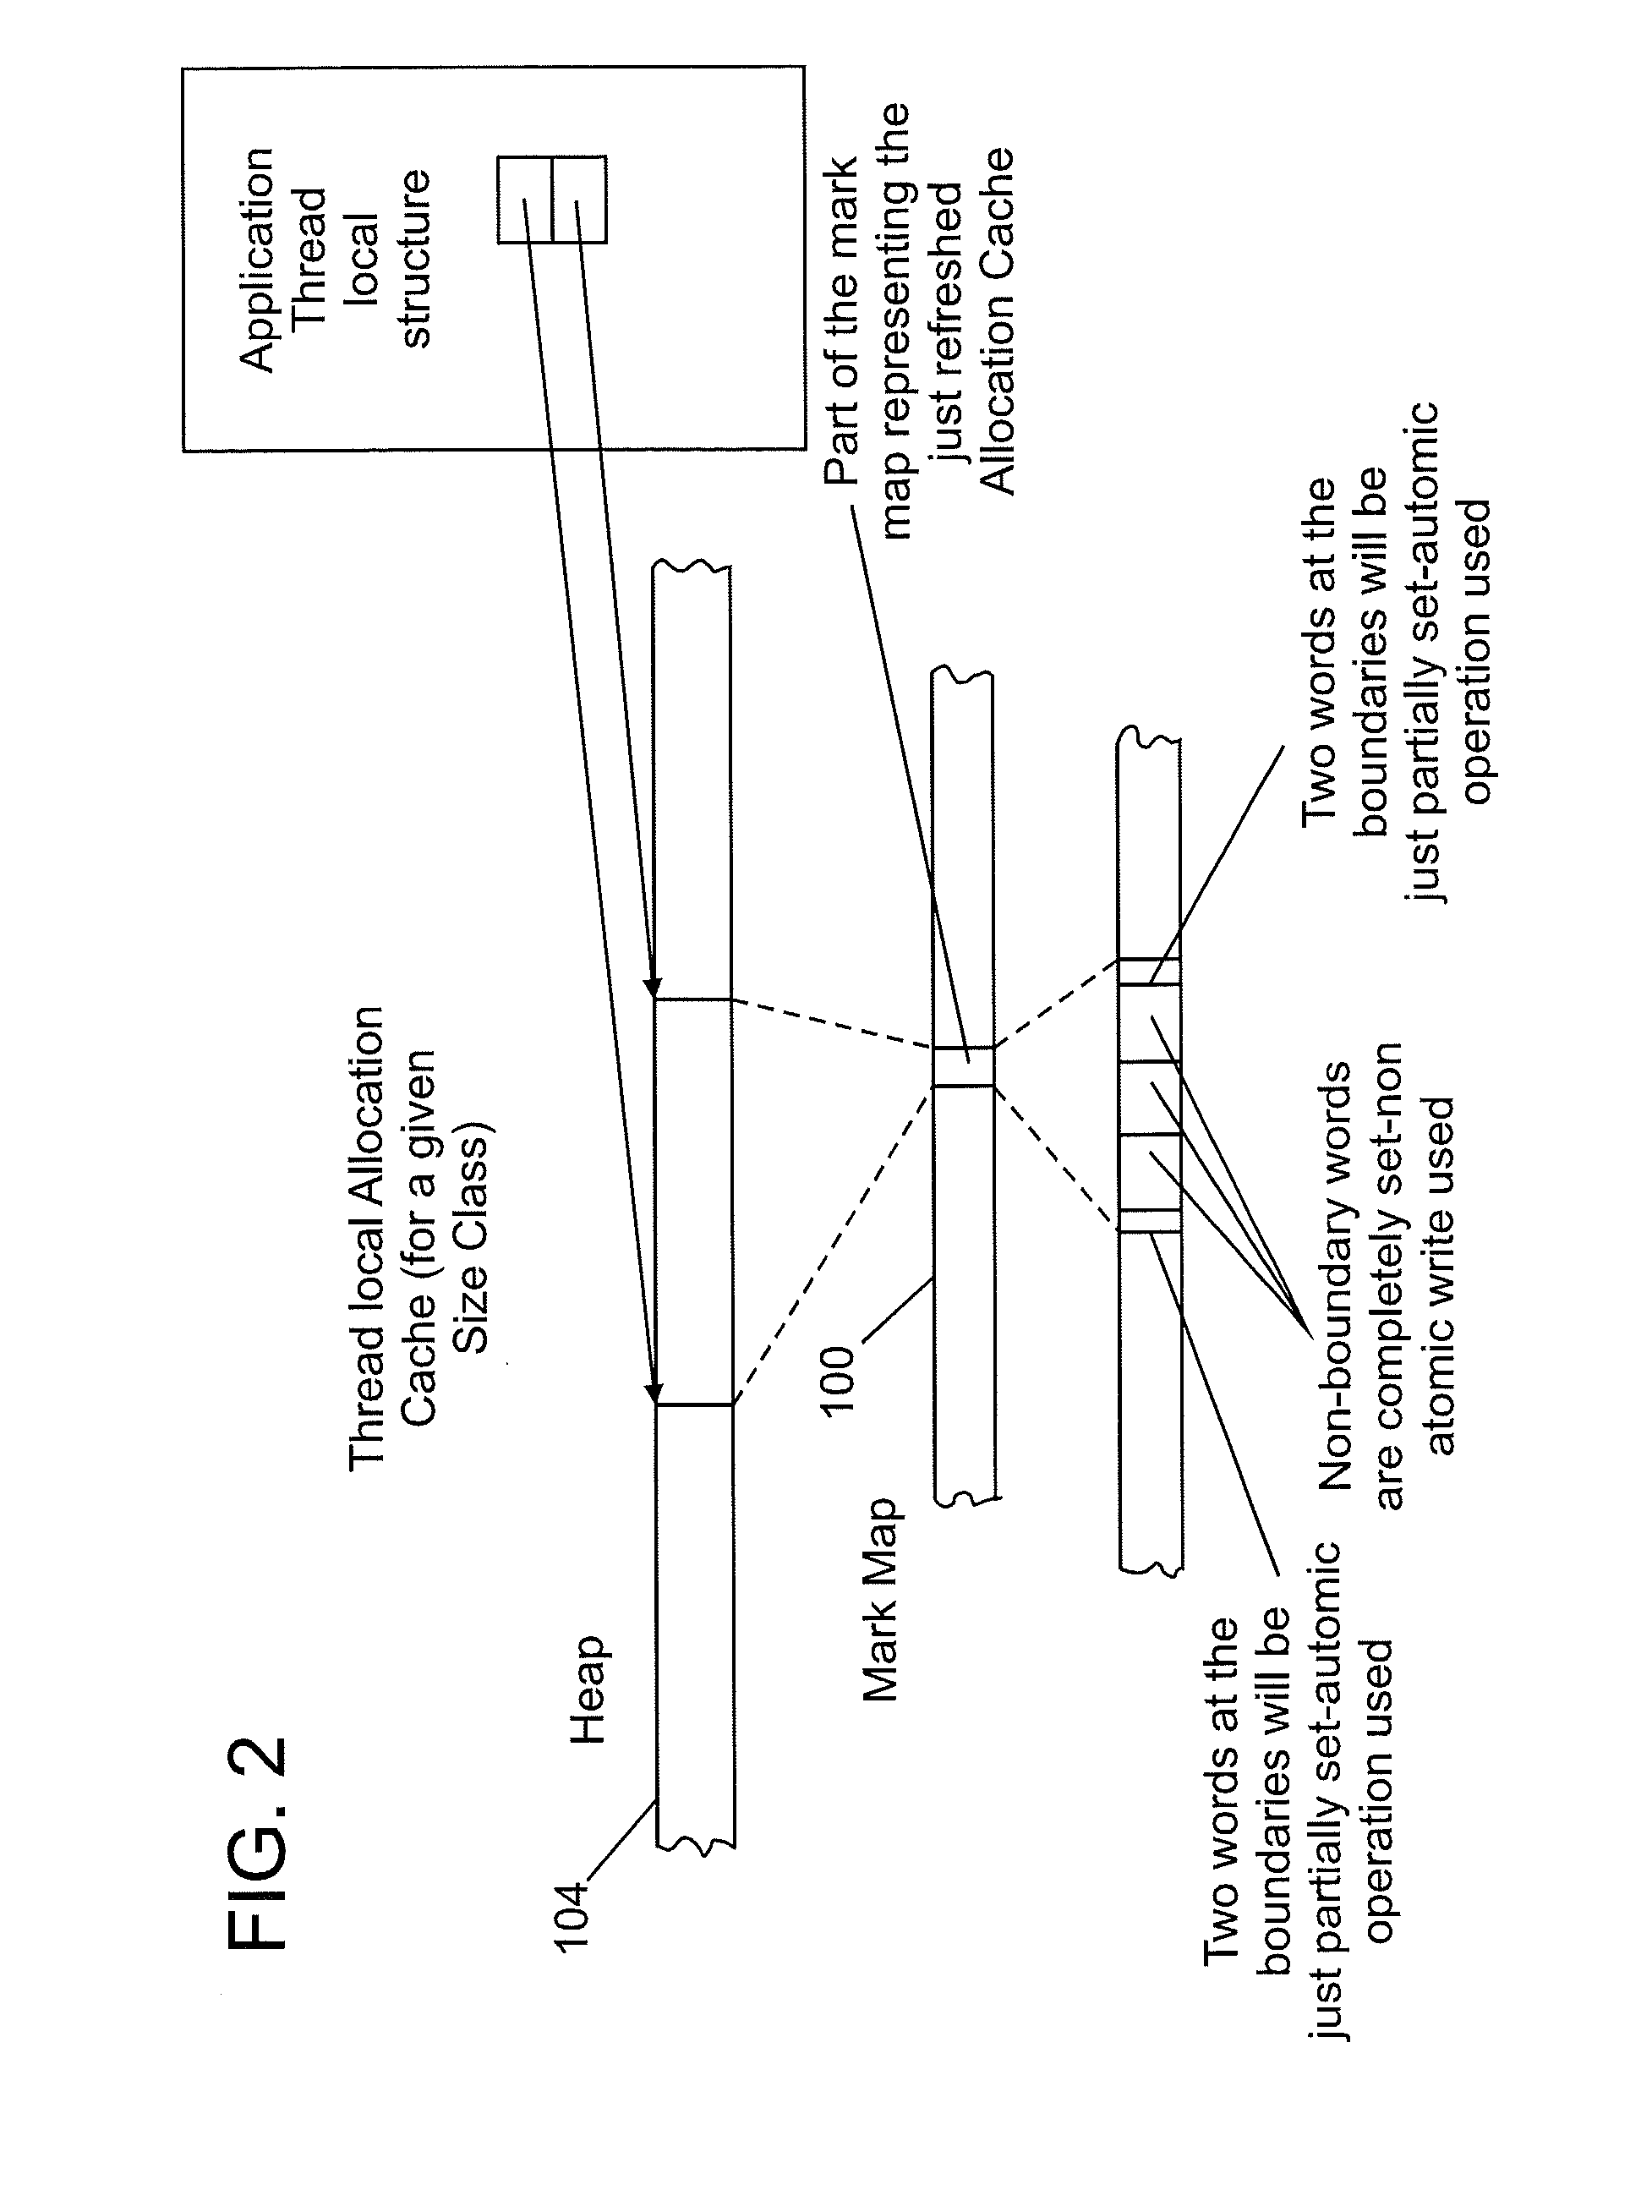 Allocation cache premarking for snap-shot-at-the-beginning concurrent mark-and-sweep collector